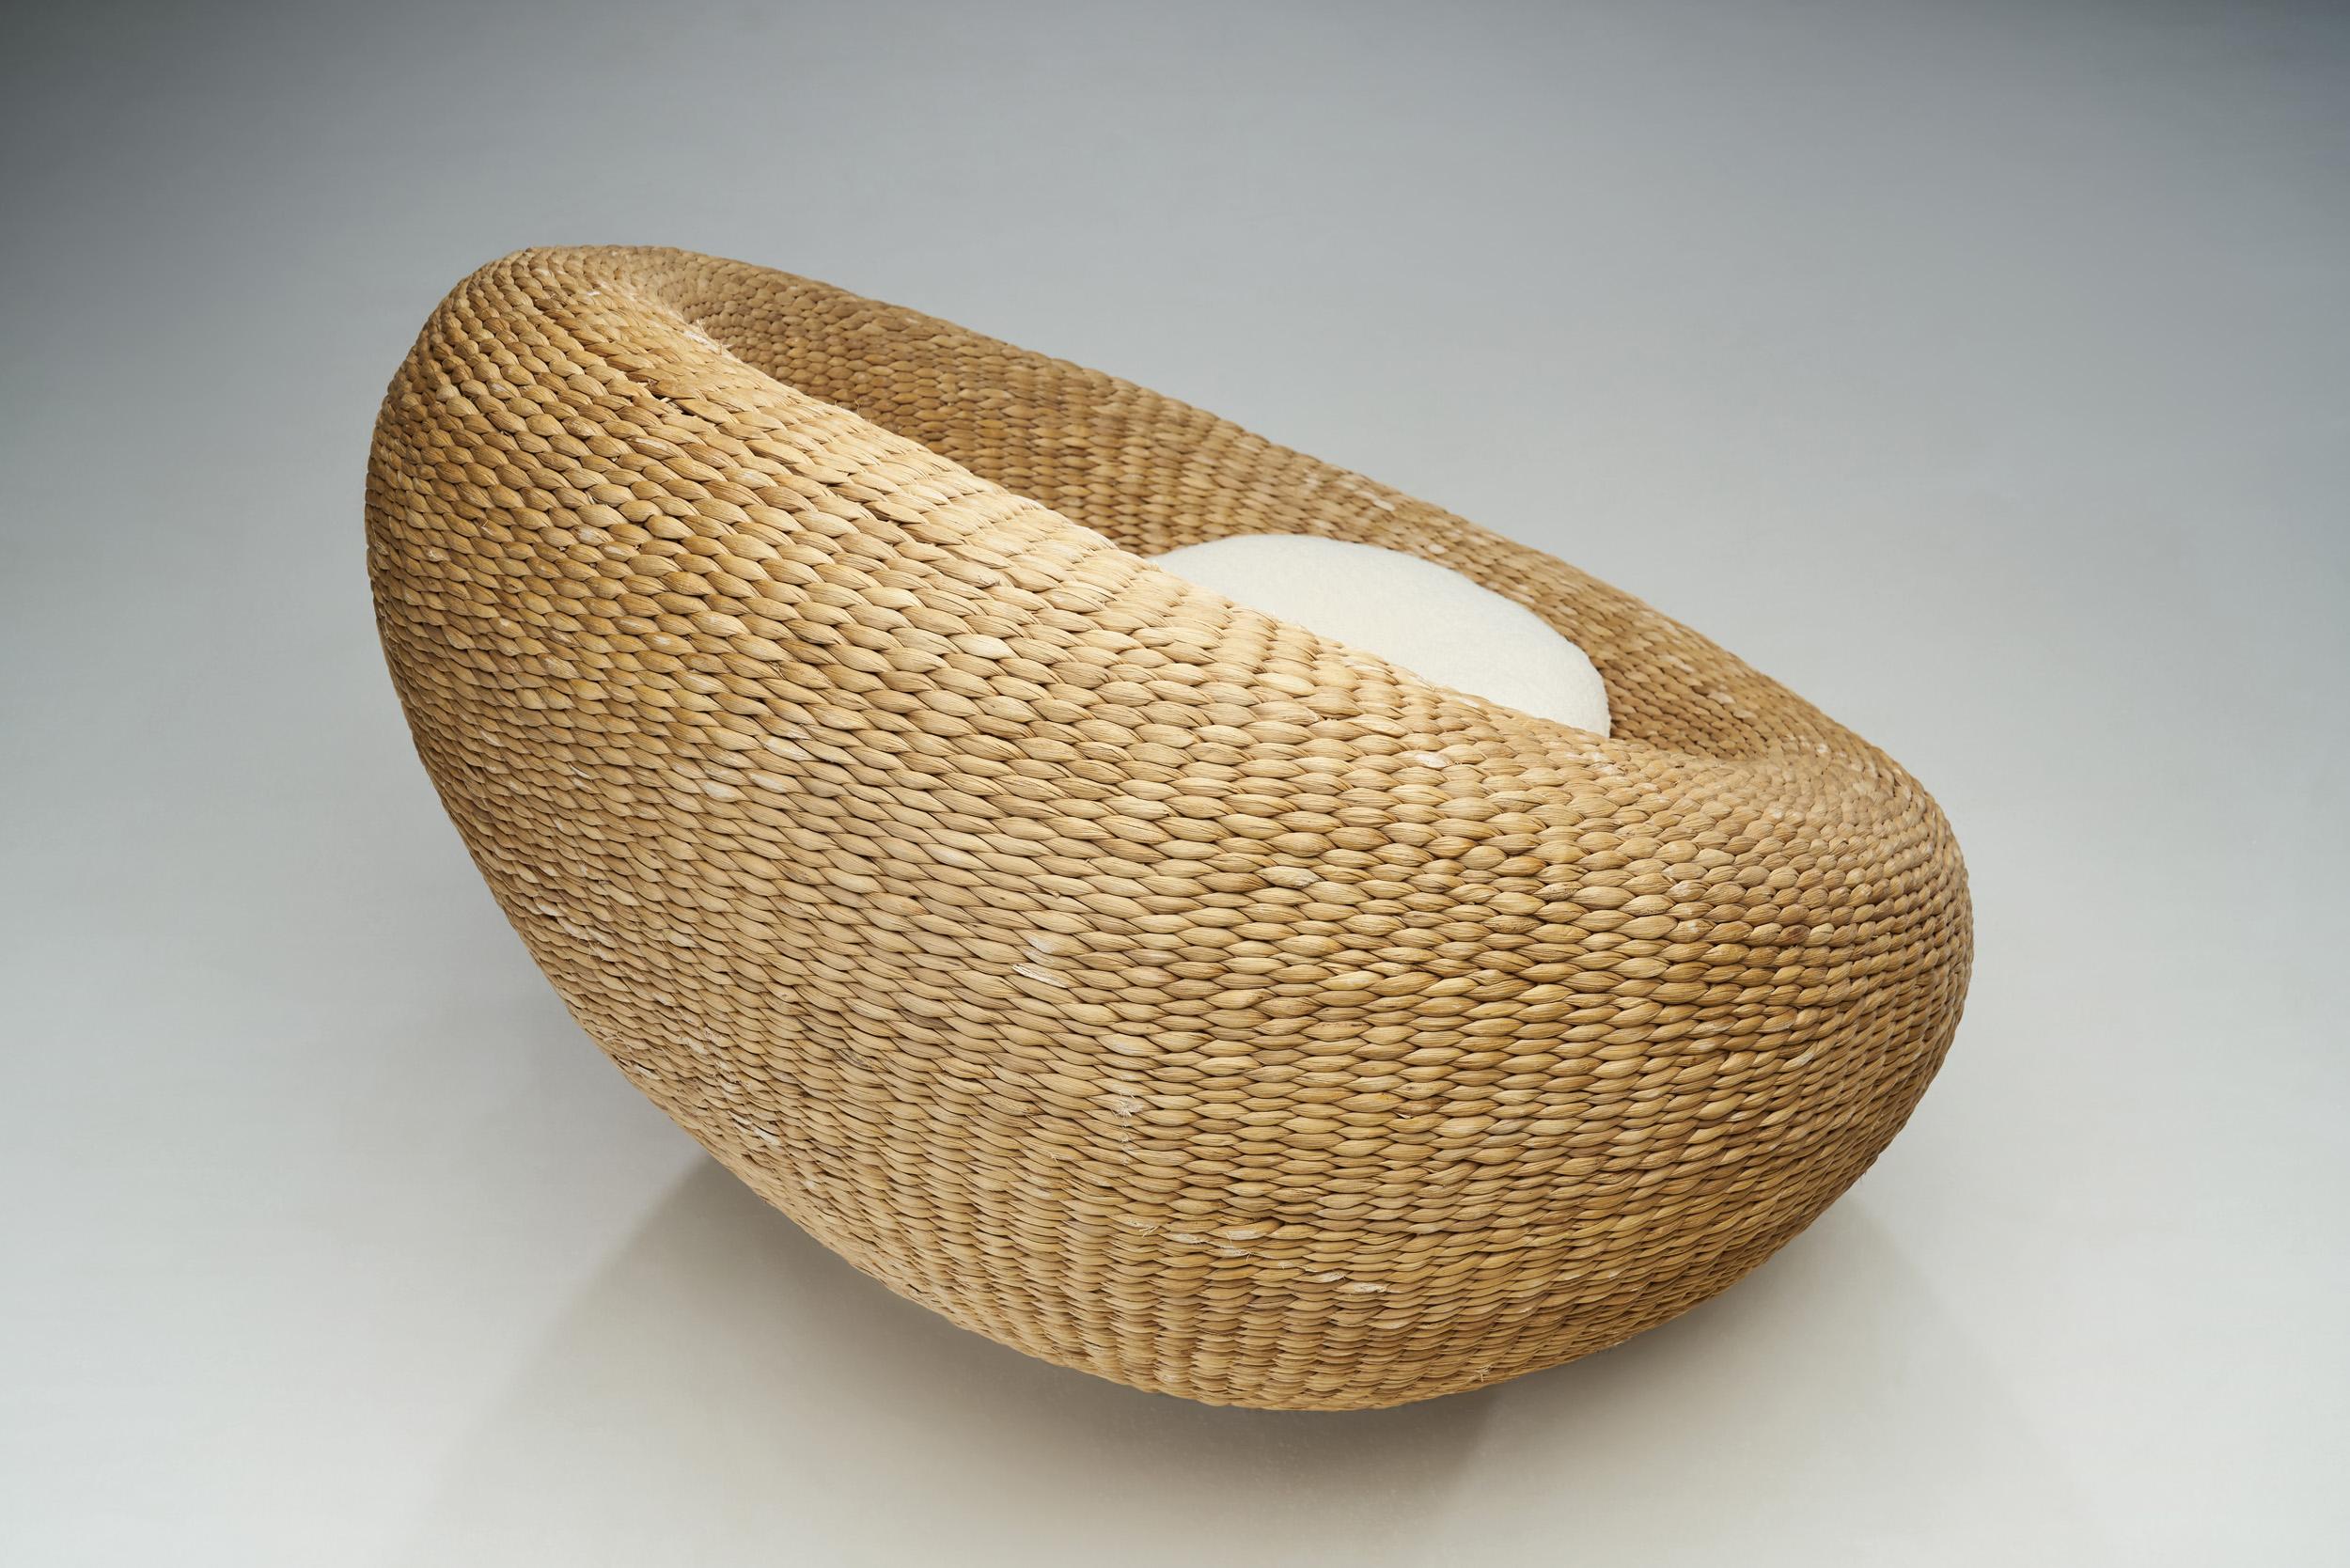 Woven Wicker Bird's Nest Chair in the Manner of Isamu Kenmochi, Europe, ca 1960s For Sale 1